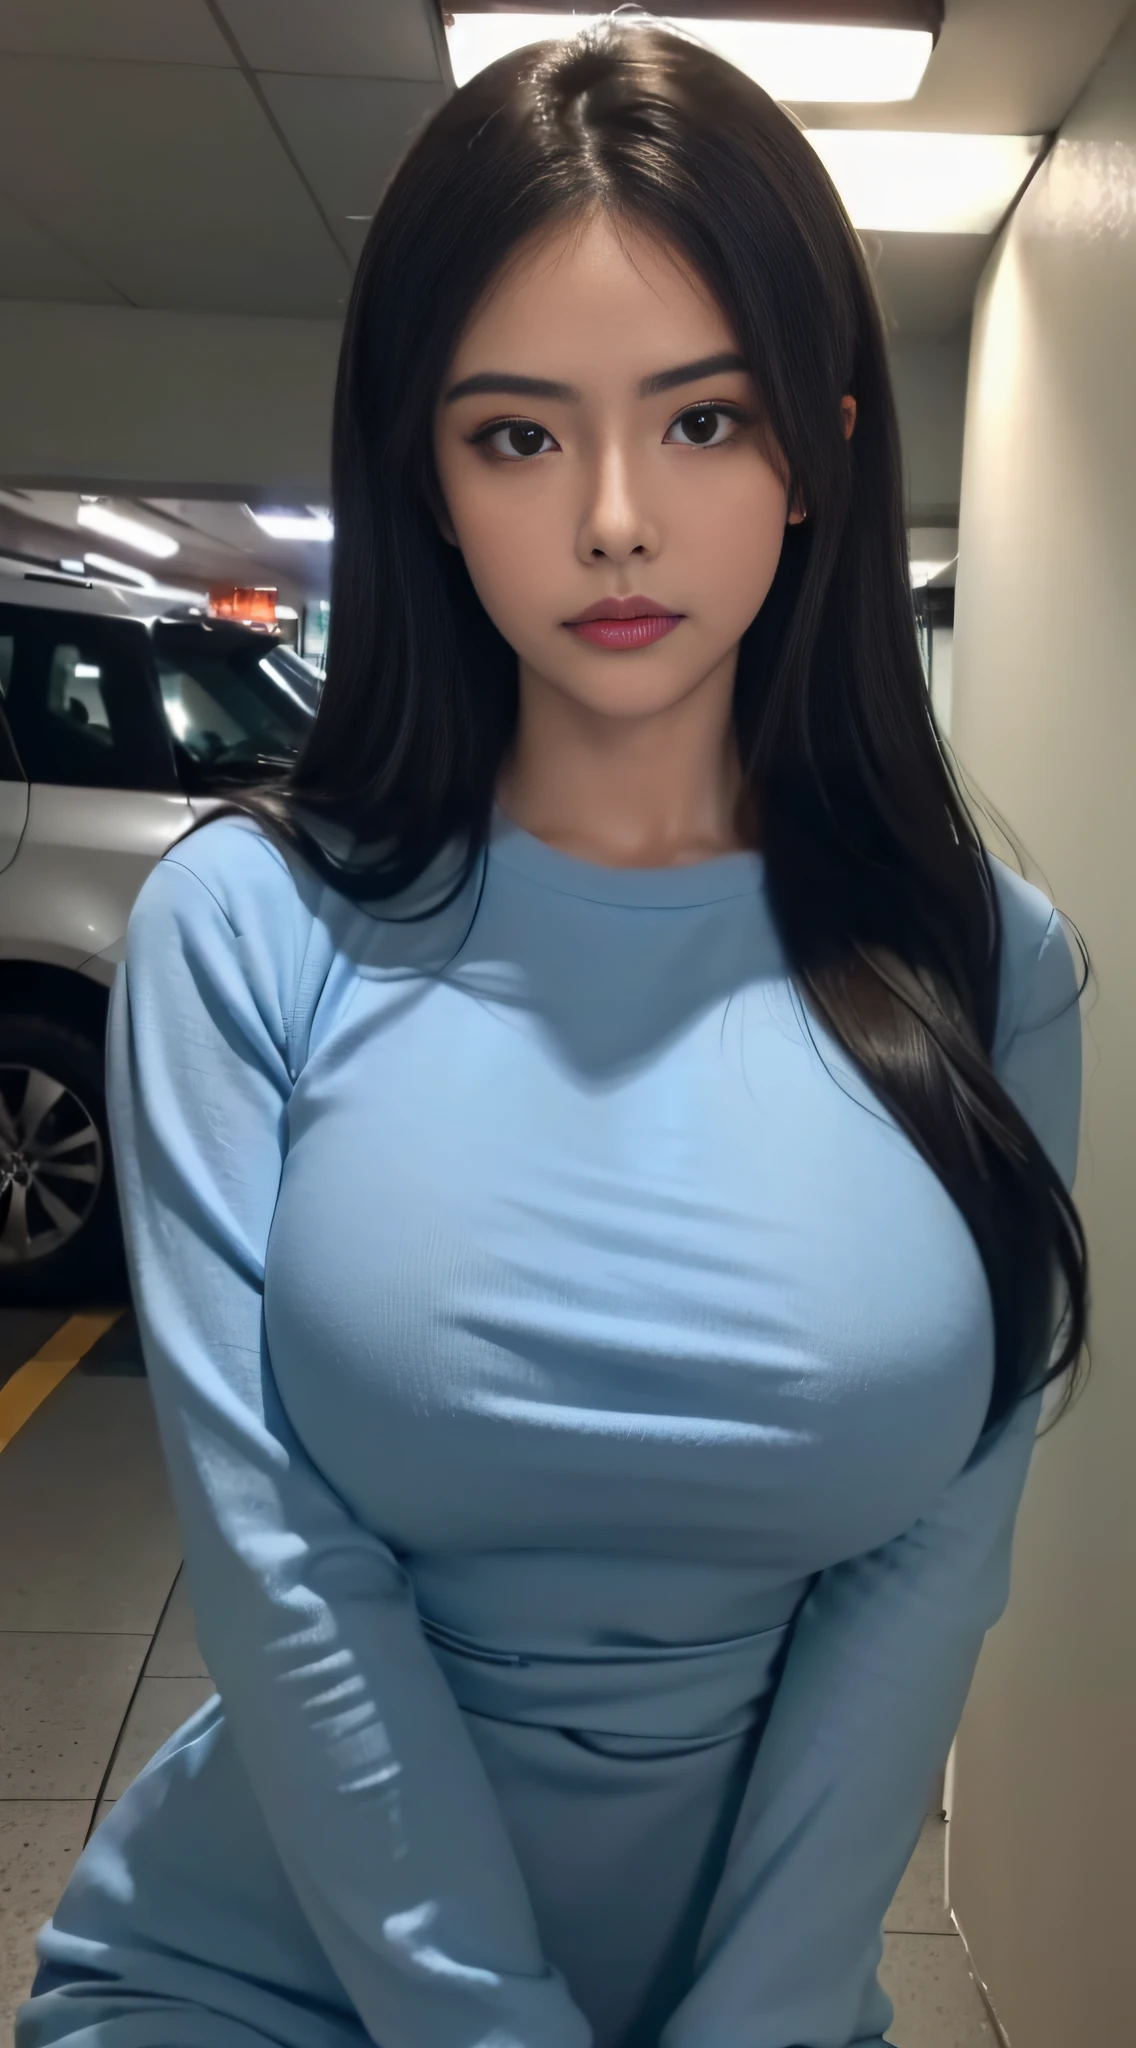 (Extremely detailed, underground parking, fine, slightly fat, busty, big breasts, big breasts, M cups, sexy, blue crewneck dress, conservative, refined face, large aperture, close-up of people)